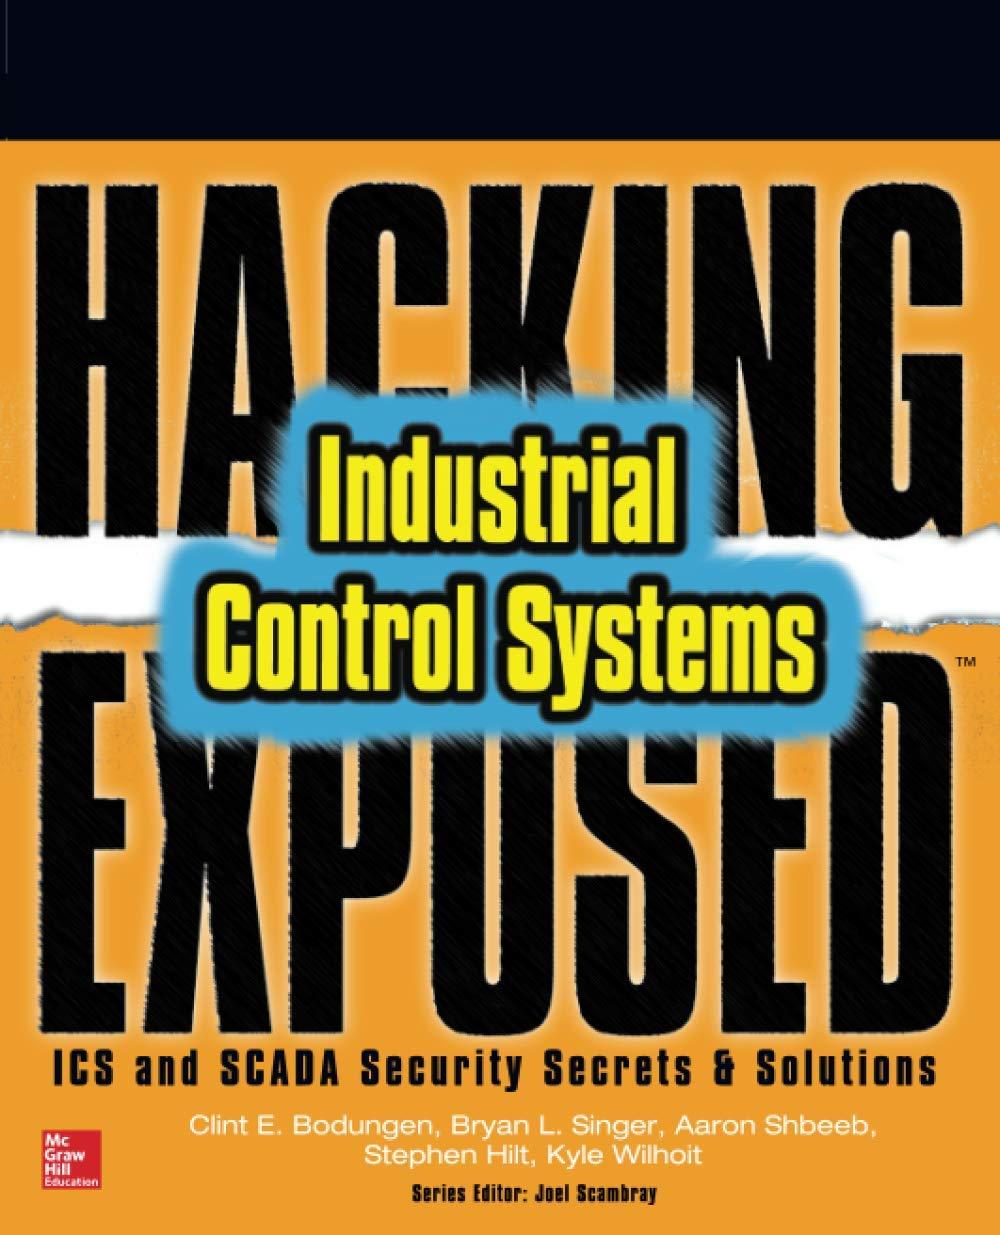 hacking exposed industrial control systems ics and scada security secrets & solutions 1st edition clint